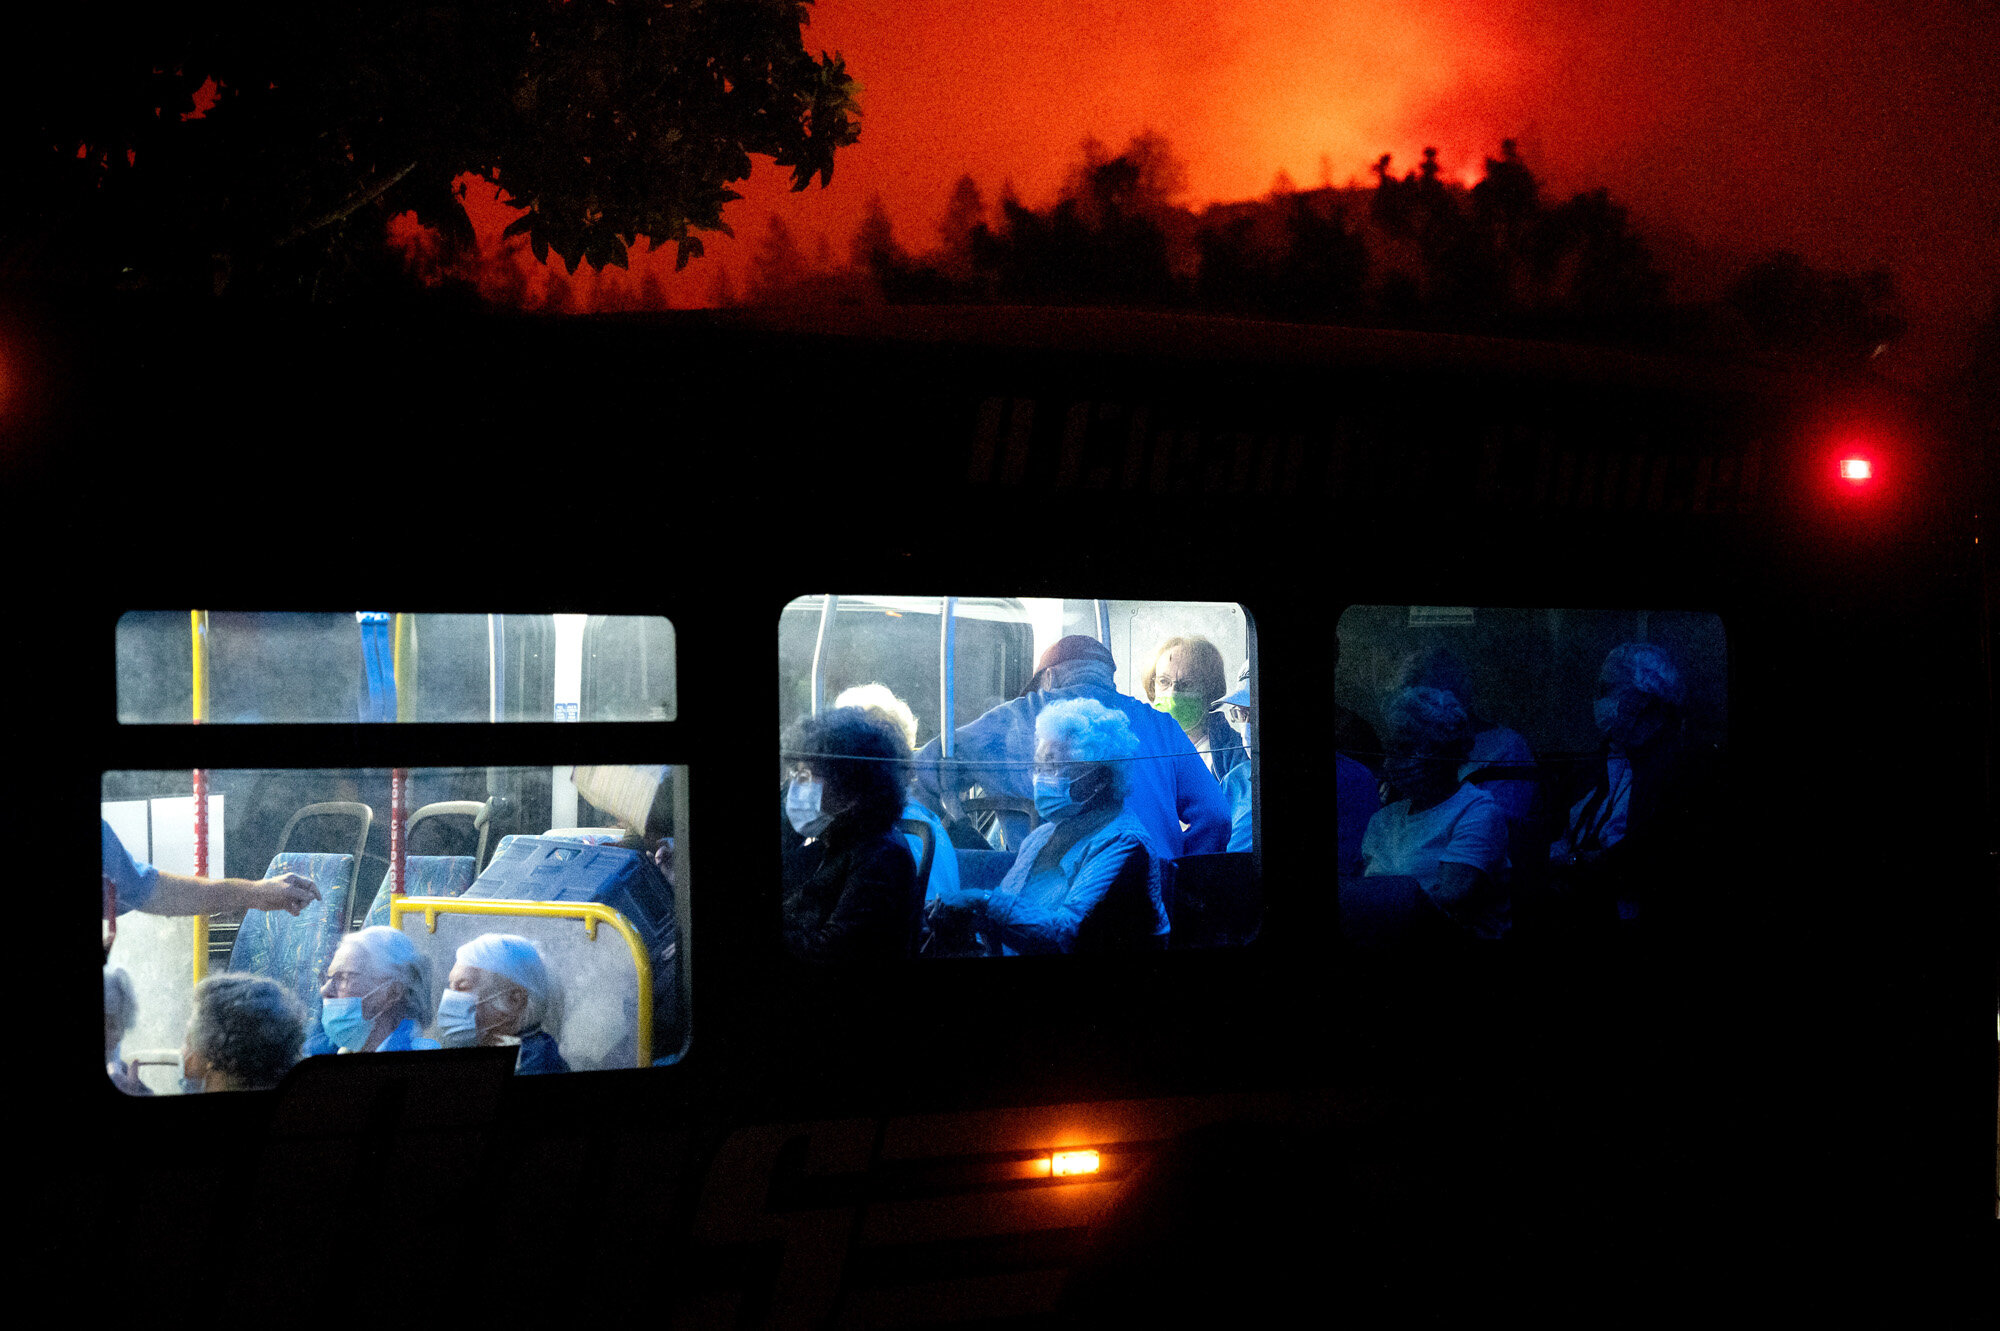  Residents of the Oakmont Gardens senior home evacuate on a bus as the Shady Fire approaches in Santa Rosa Calif., on Sept. 28, 2020. (AP Photo/Noah Berger) 